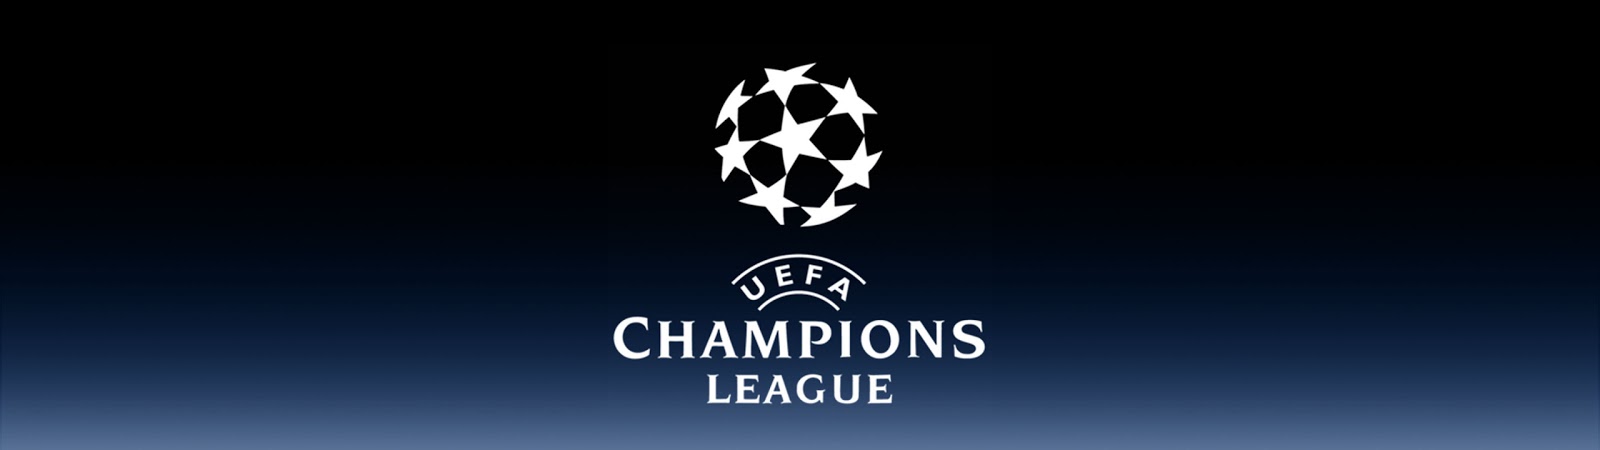 Champions League Fresh Gallery Resources